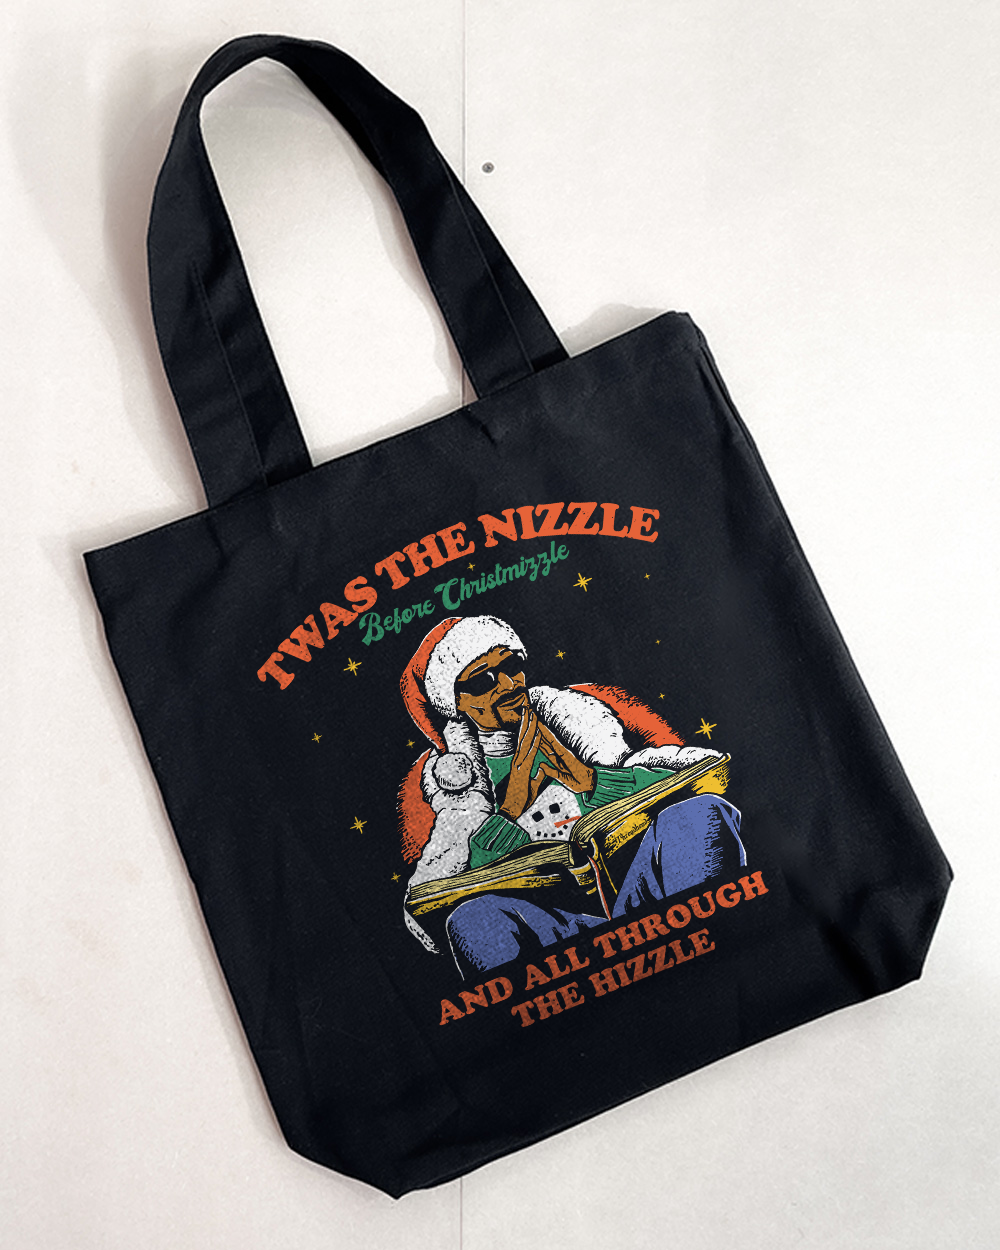 Christmizzle Dogg Tote Bag Europe Online Black